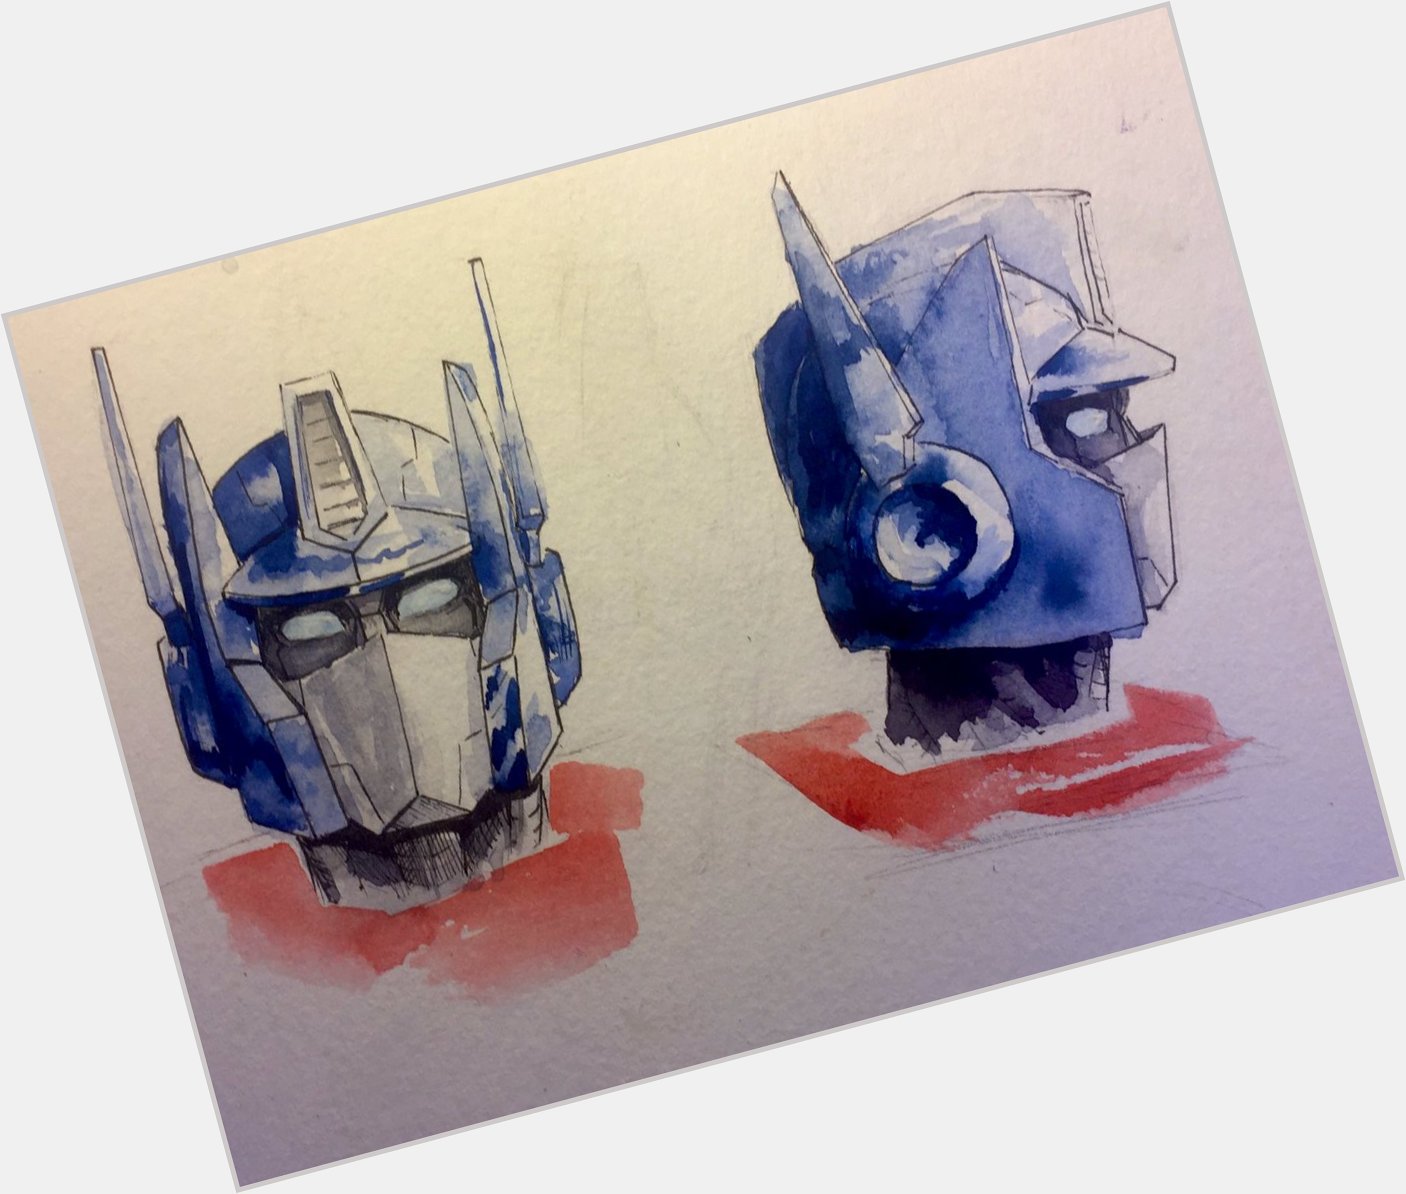 Haven t done Transformers art in ages, but here s a couple sketches I did this year. Happy birthday Peter Cullen! 